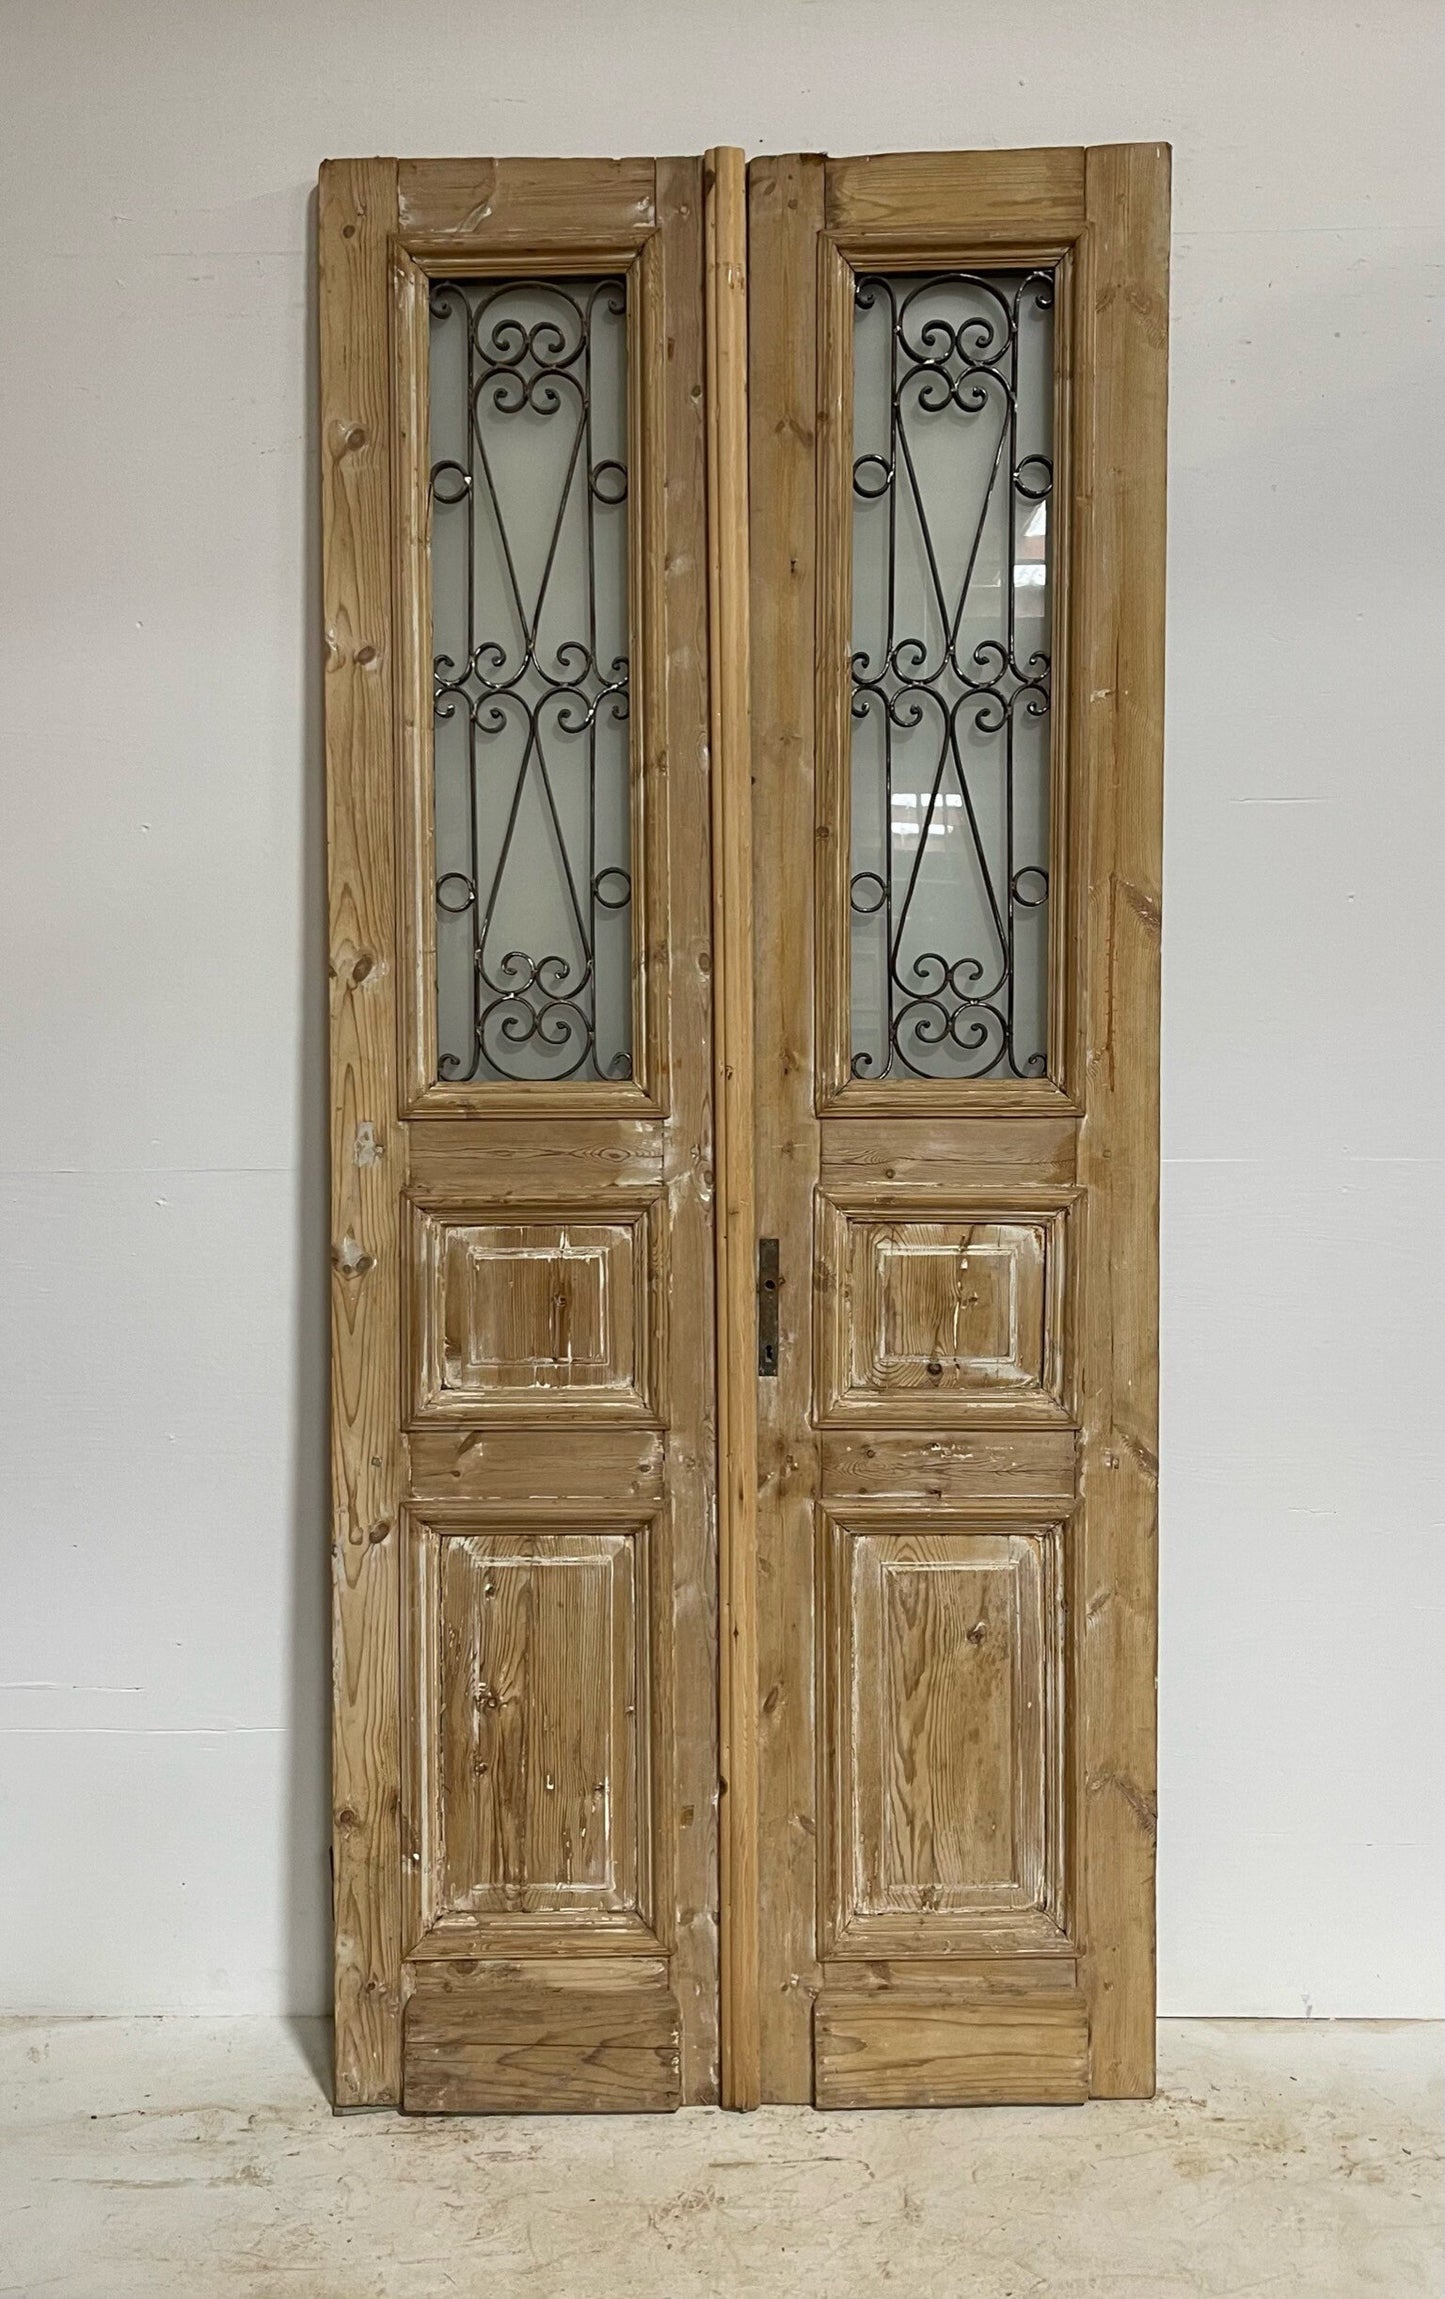 Antique French doors (99.5x42.75) with metal G0989